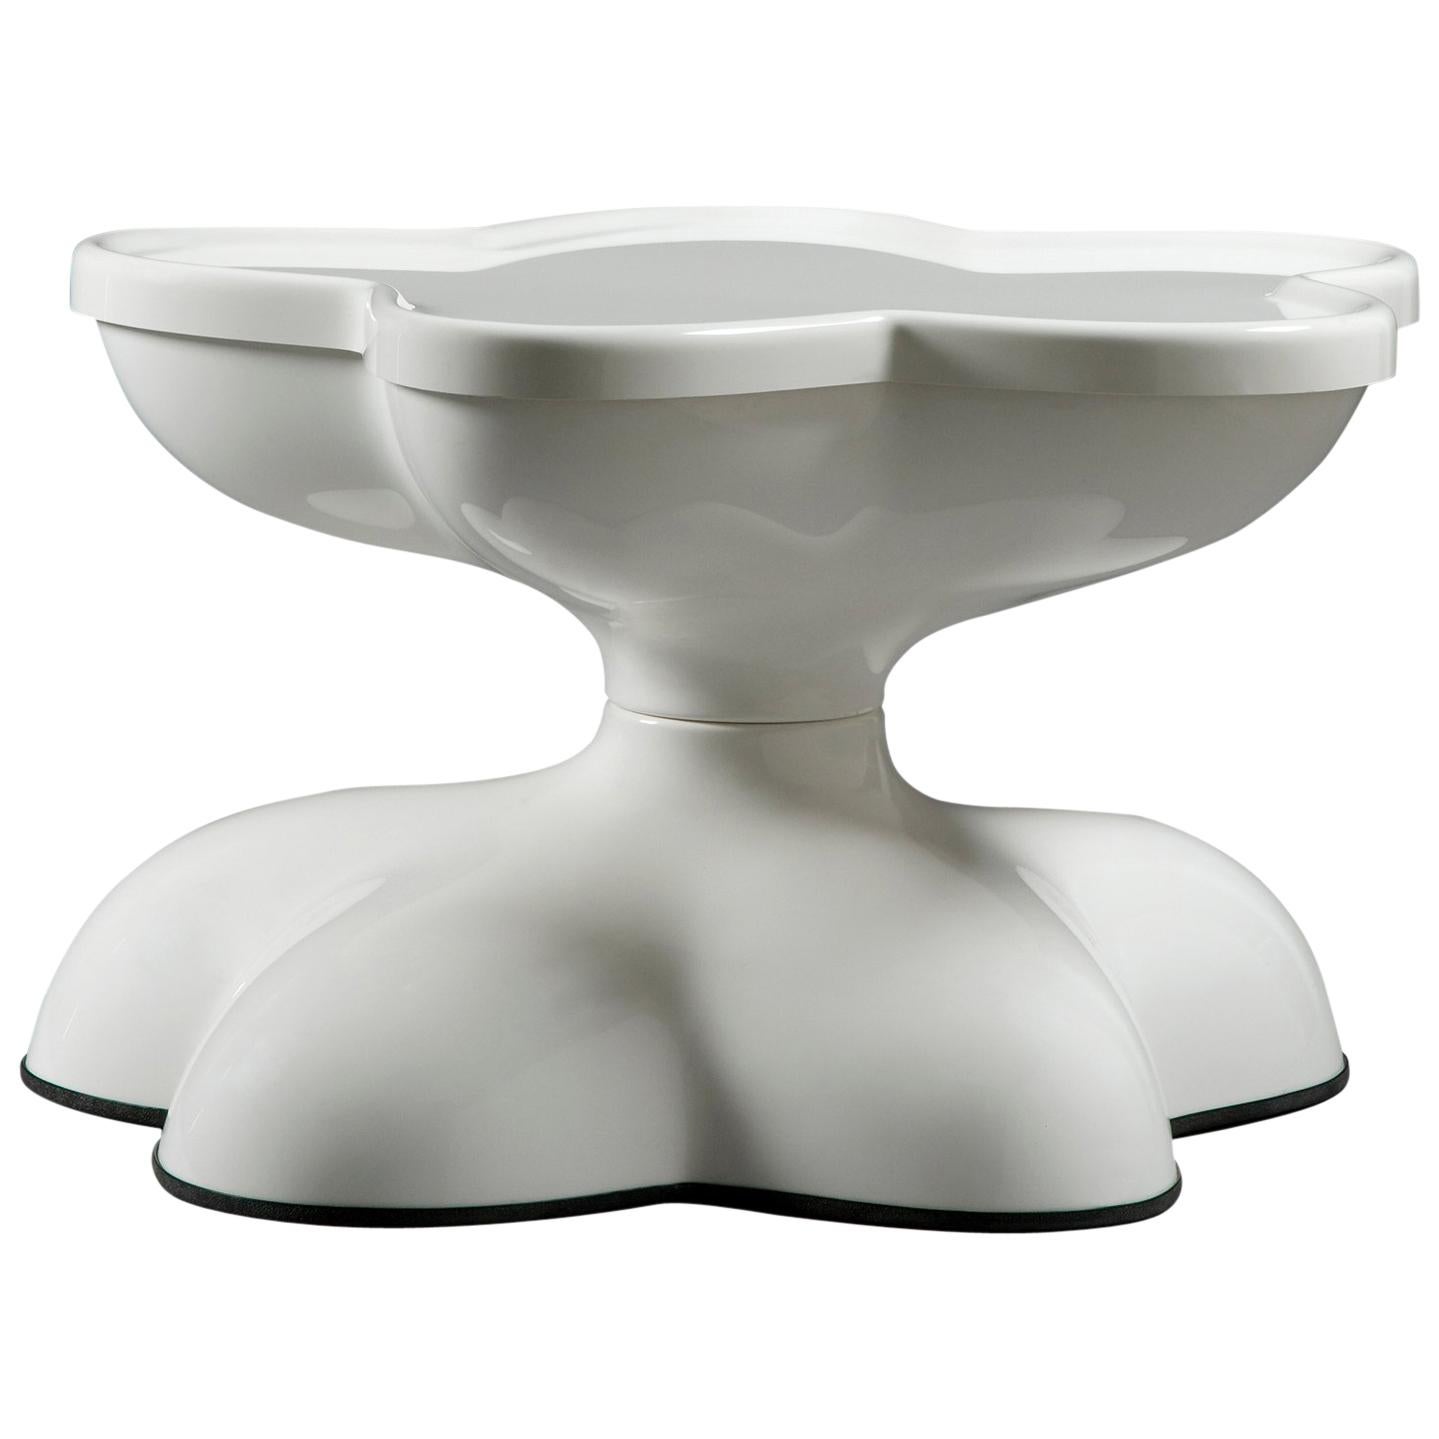 Wendell Castle Molar Swivel Coffee Table in White Plastic For Sale